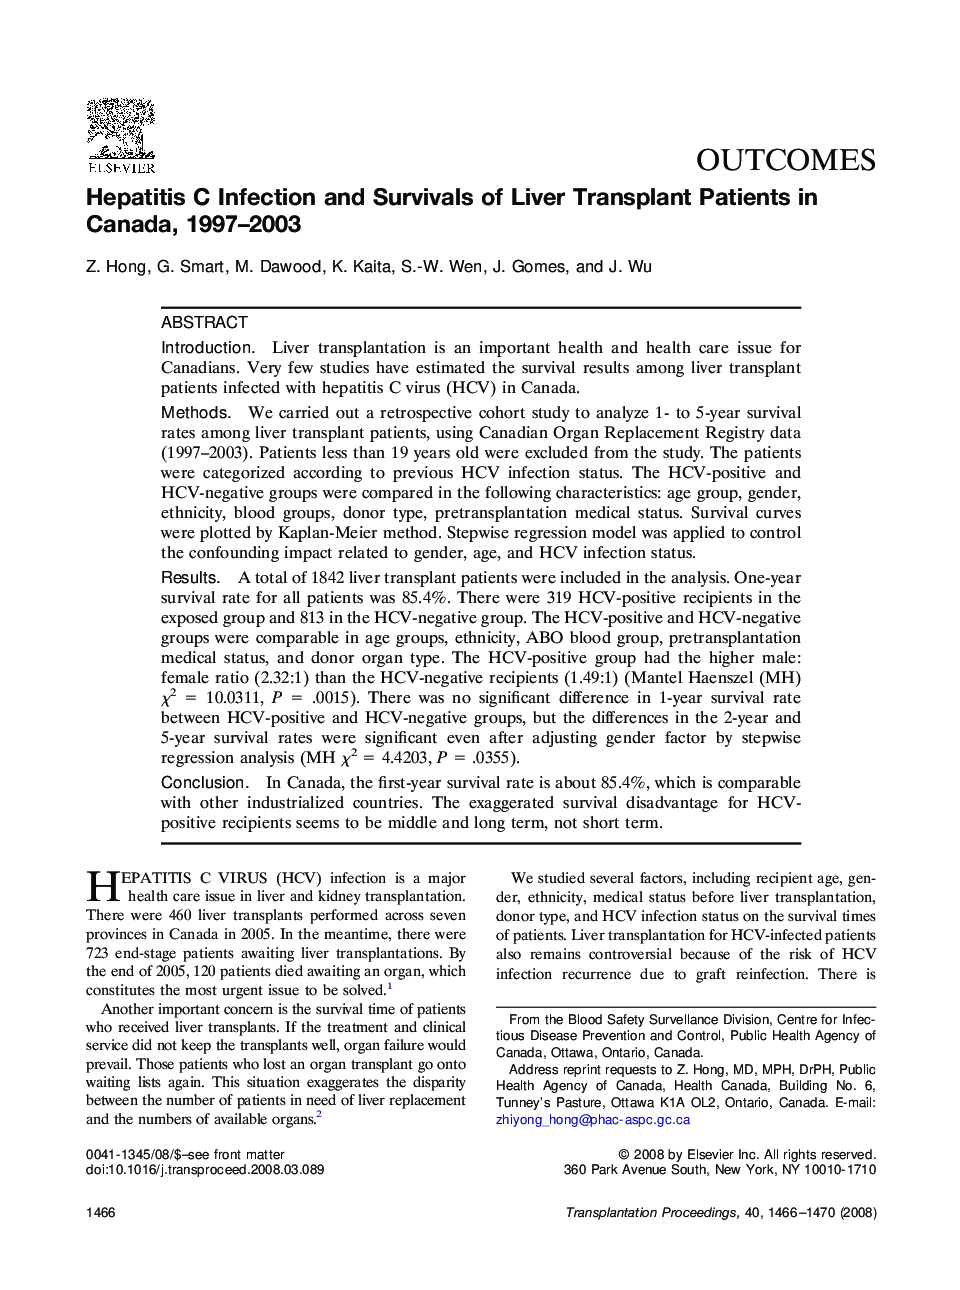 Hepatitis C Infection and Survivals of Liver Transplant Patients in Canada, 1997–2003